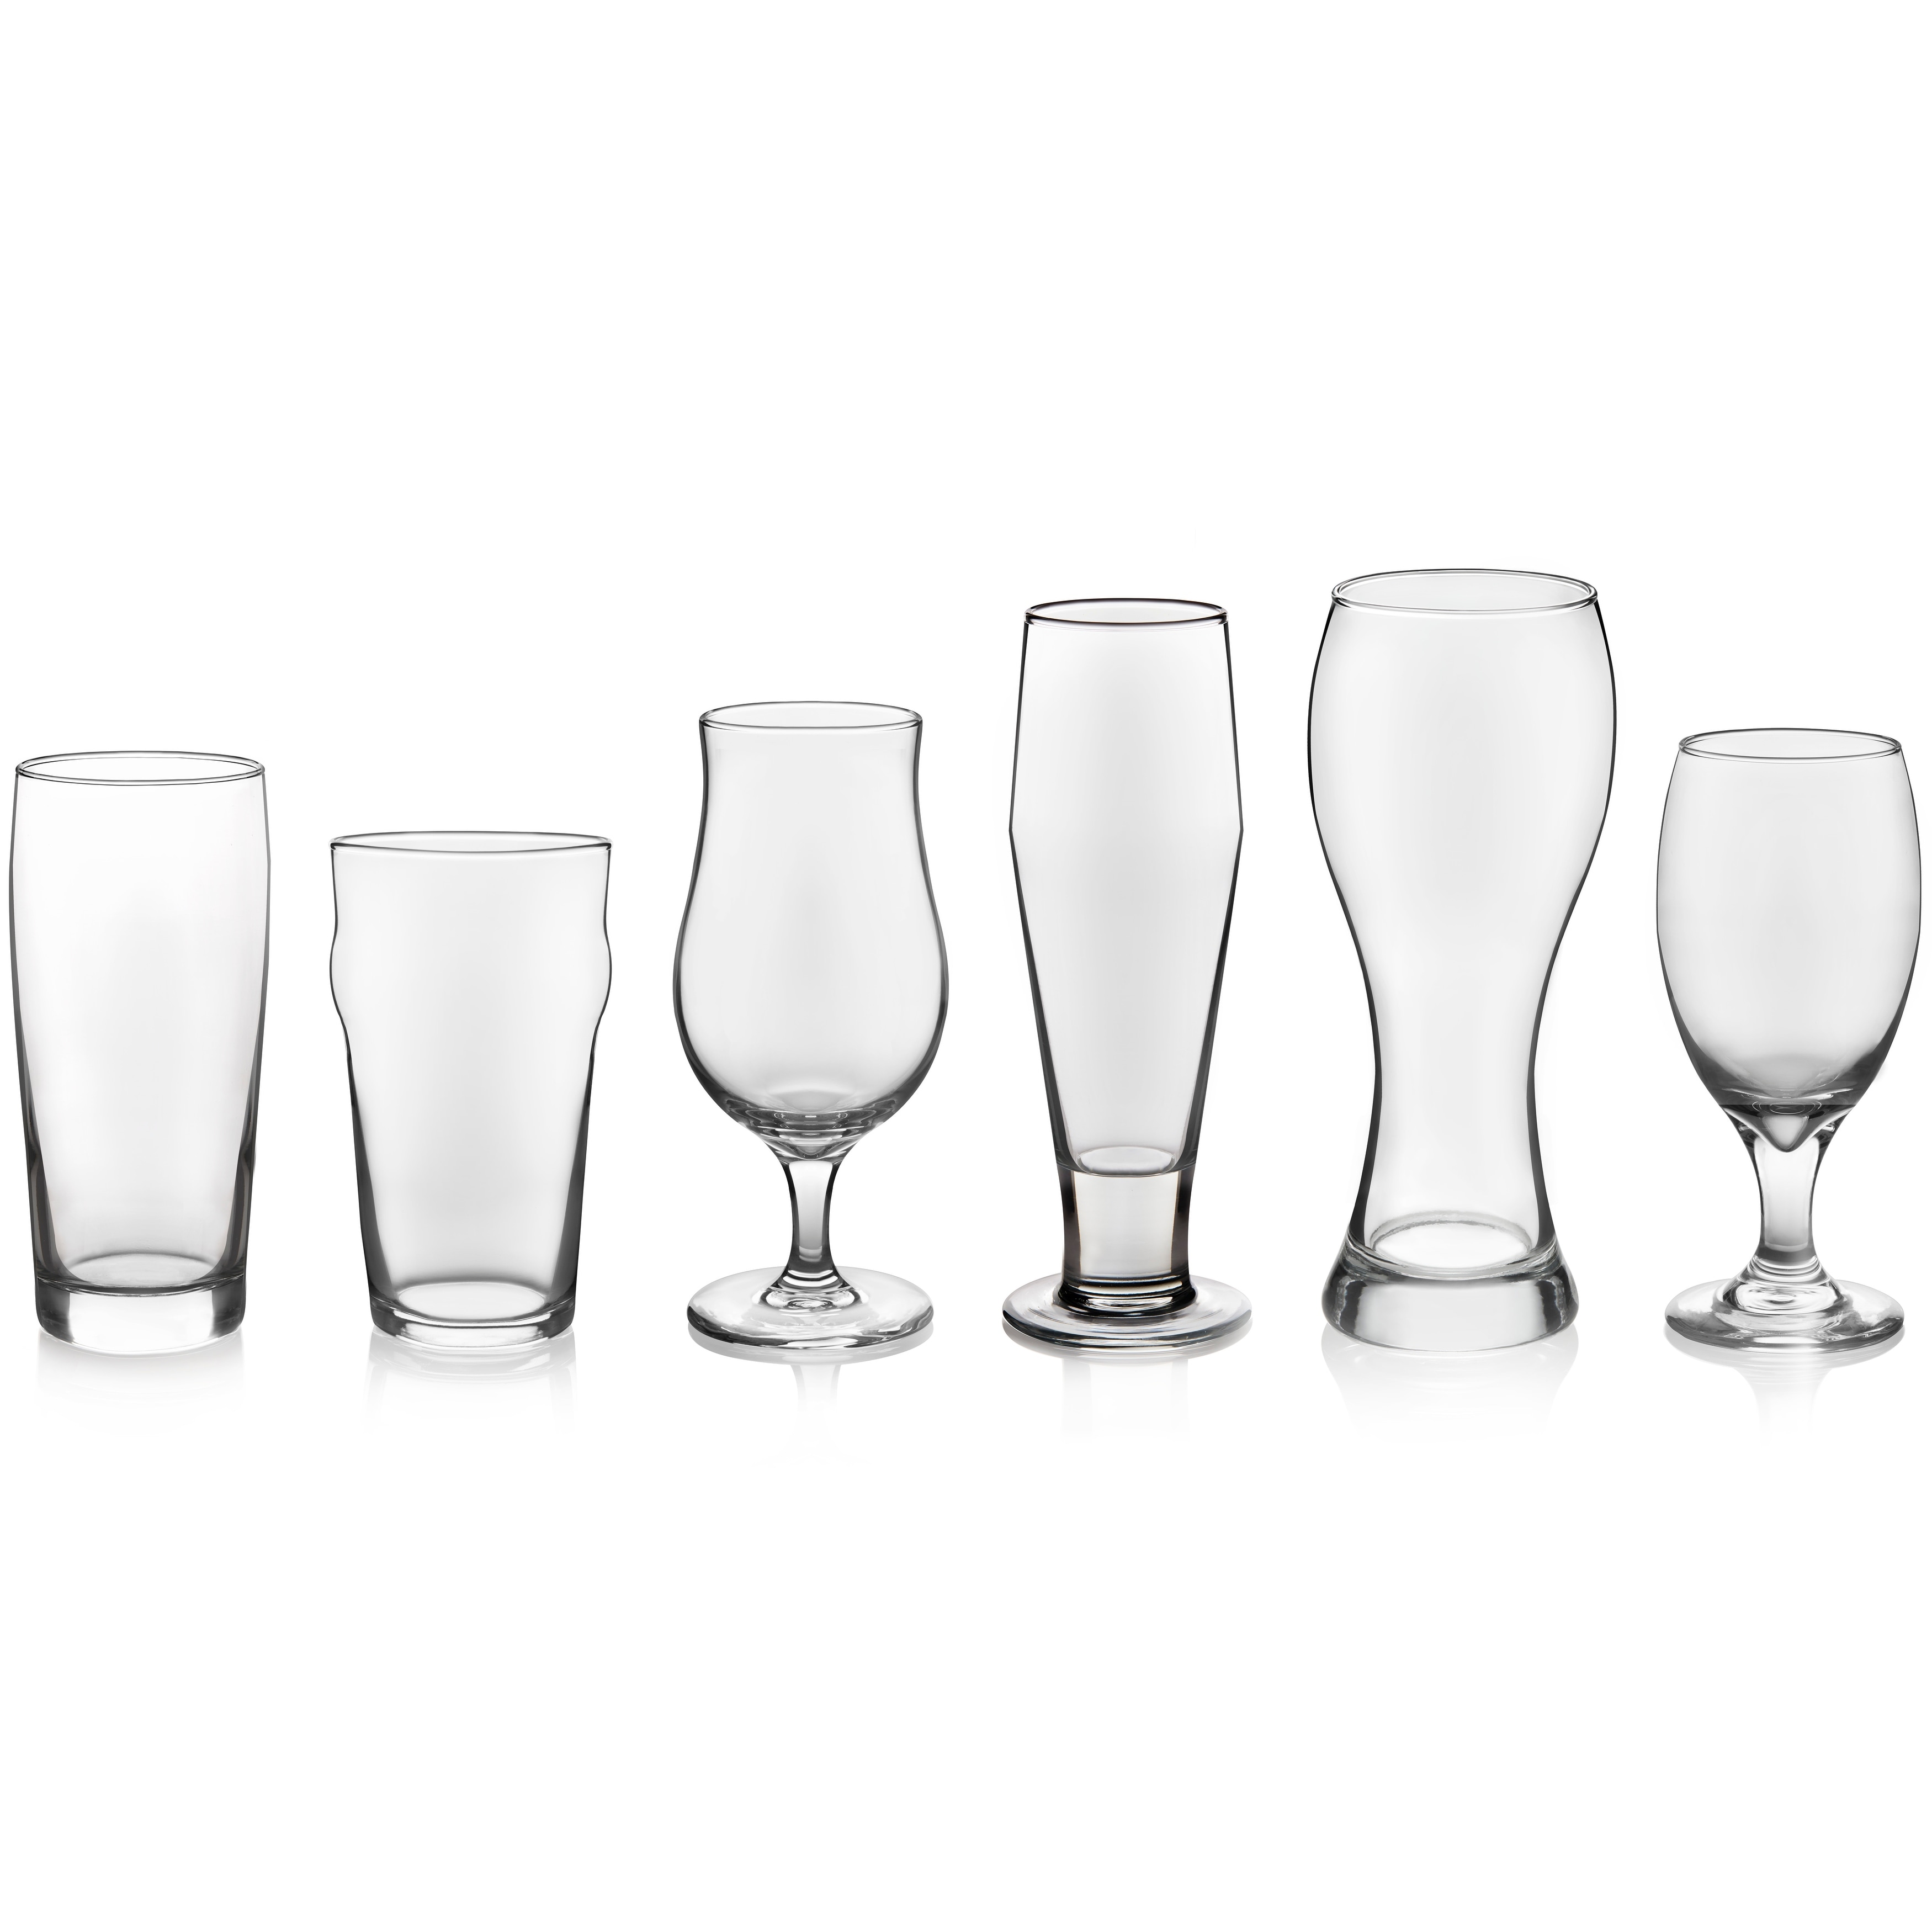 https://ak1.ostkcdn.com/images/products/is/images/direct/4fe010c7b060f34219b4c486589e74d5c6818191/Libbey-Craft-Brews-Assorted-Beer-Glasses%2C-Set-of-6.jpg